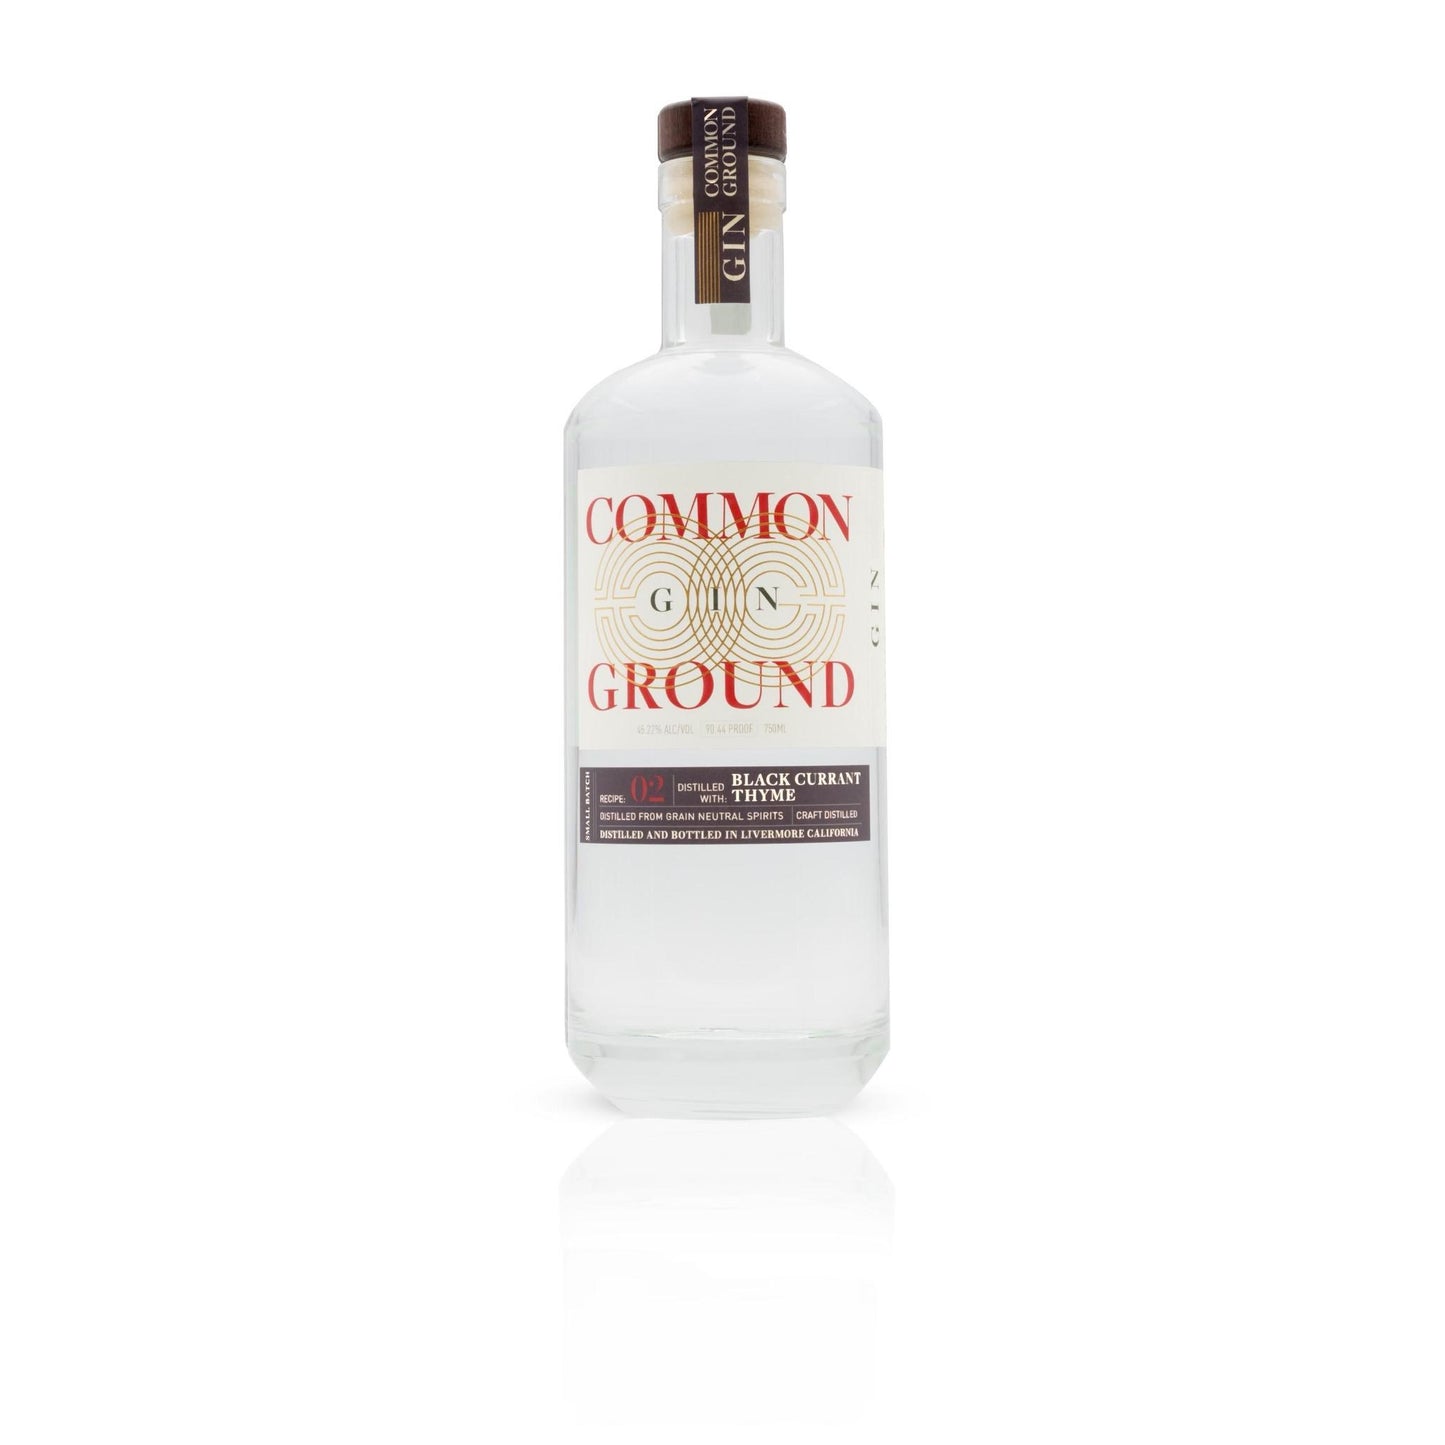 Common Ground Spirits - Black Currant & Thyme Gin (750ML) - The Epicurean Trader